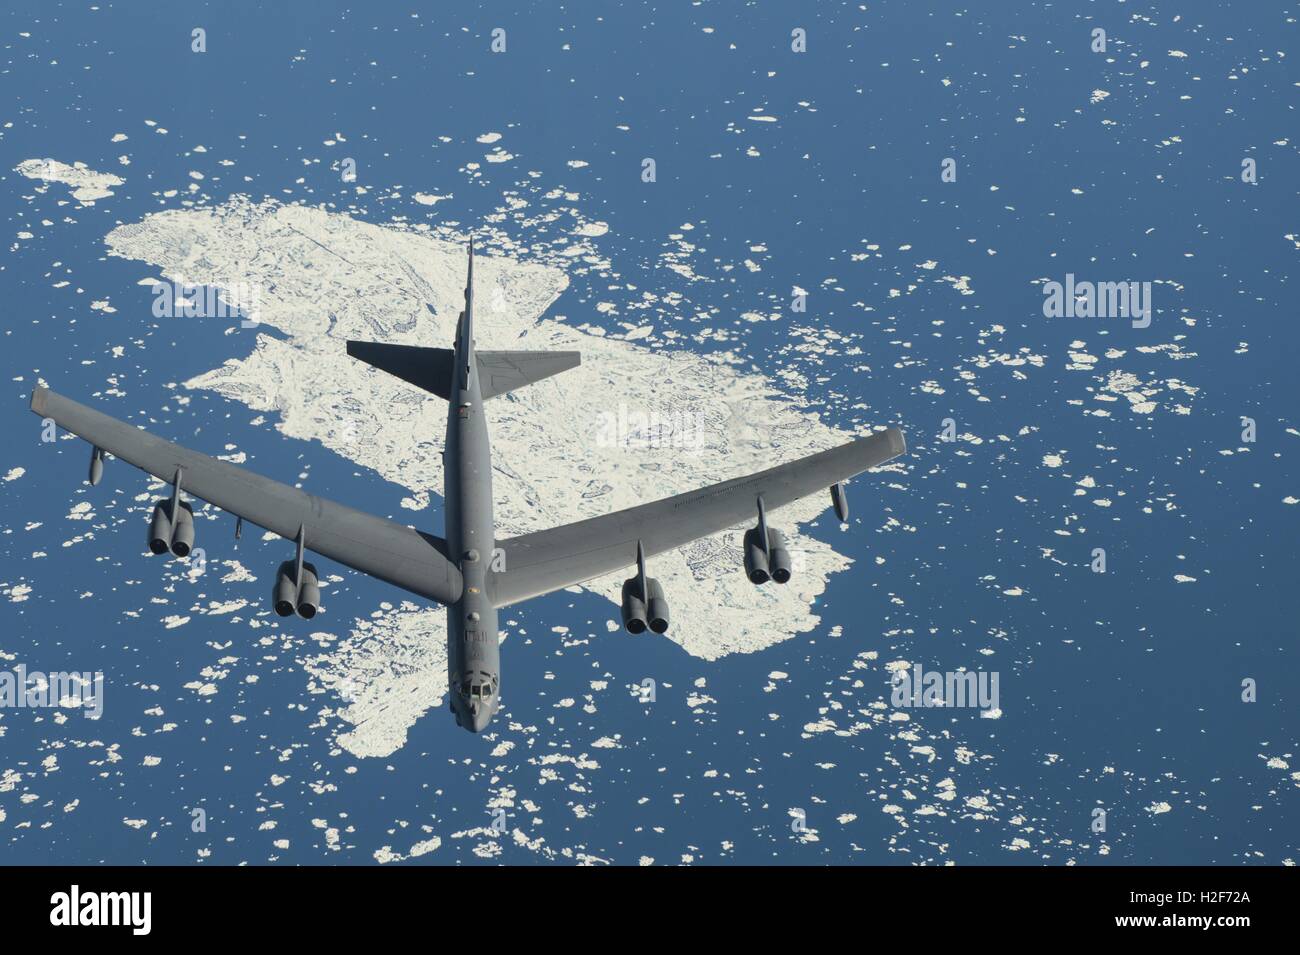 A U.S. Air Force B-52 Stratofortress bomber aircraft flies during Polar Roar exercises July 31, 2016 near the North Pole. Stock Photo